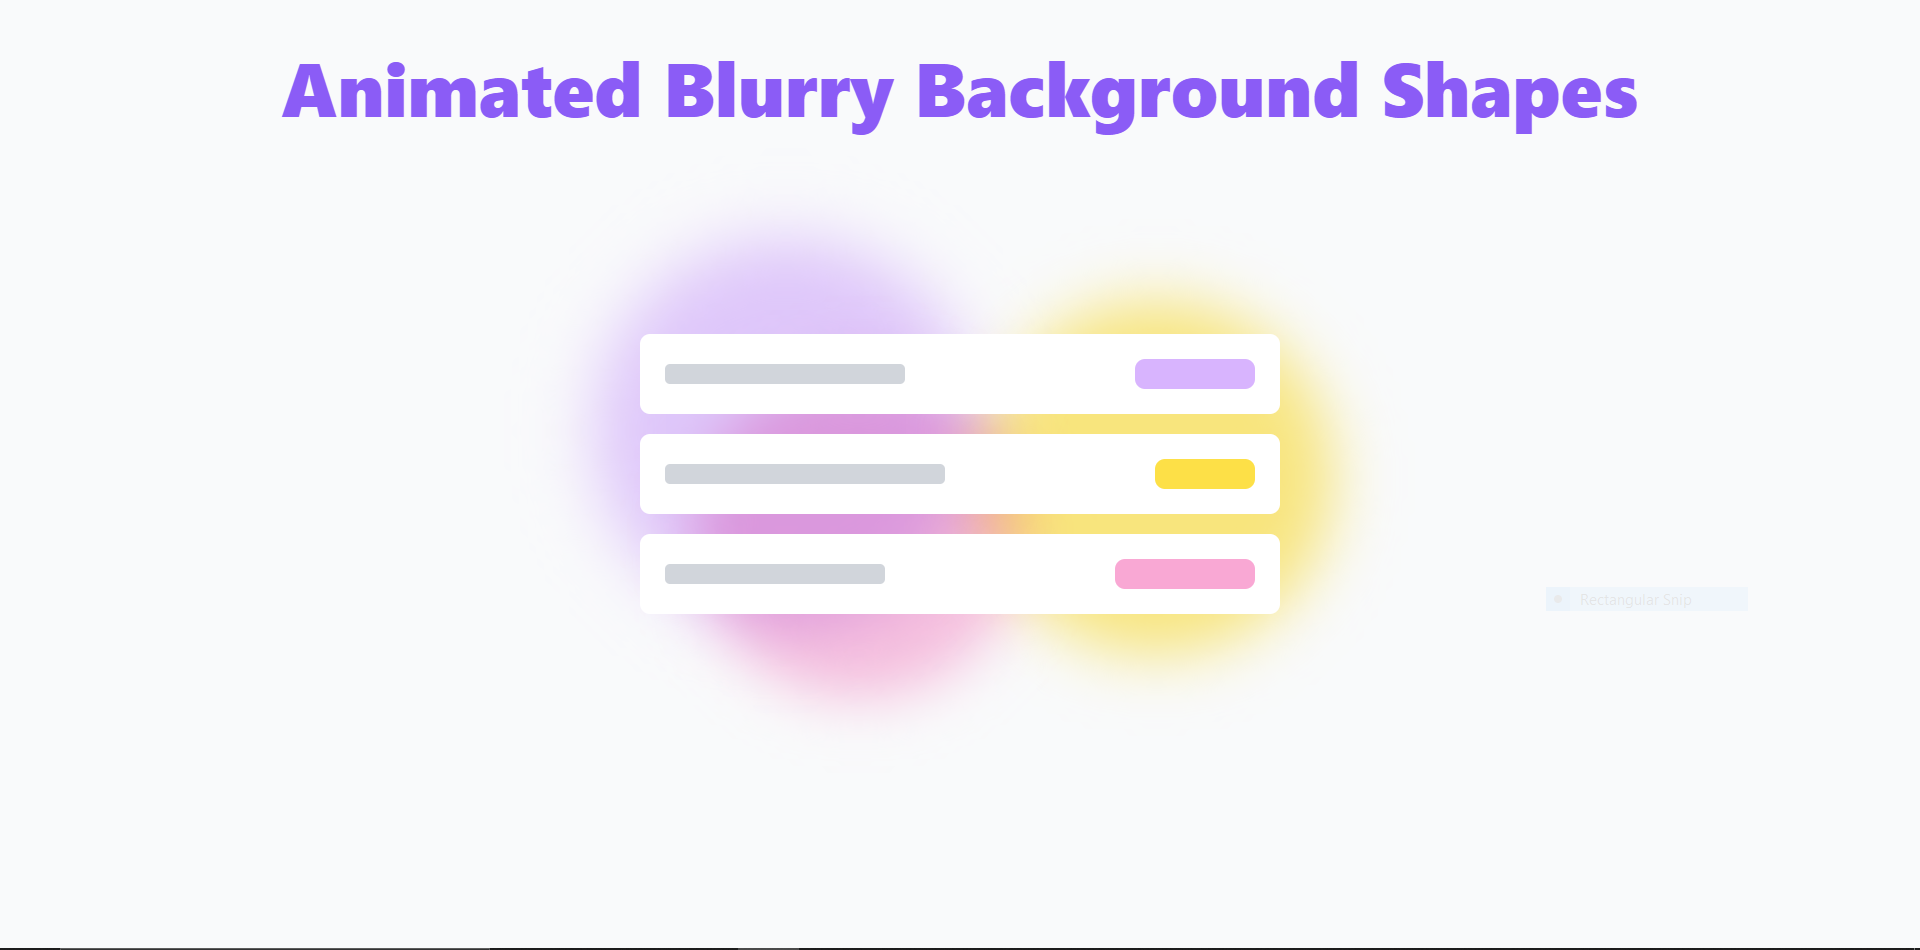 How to build Blurry, Animated Shapes with Tailwind CSS.